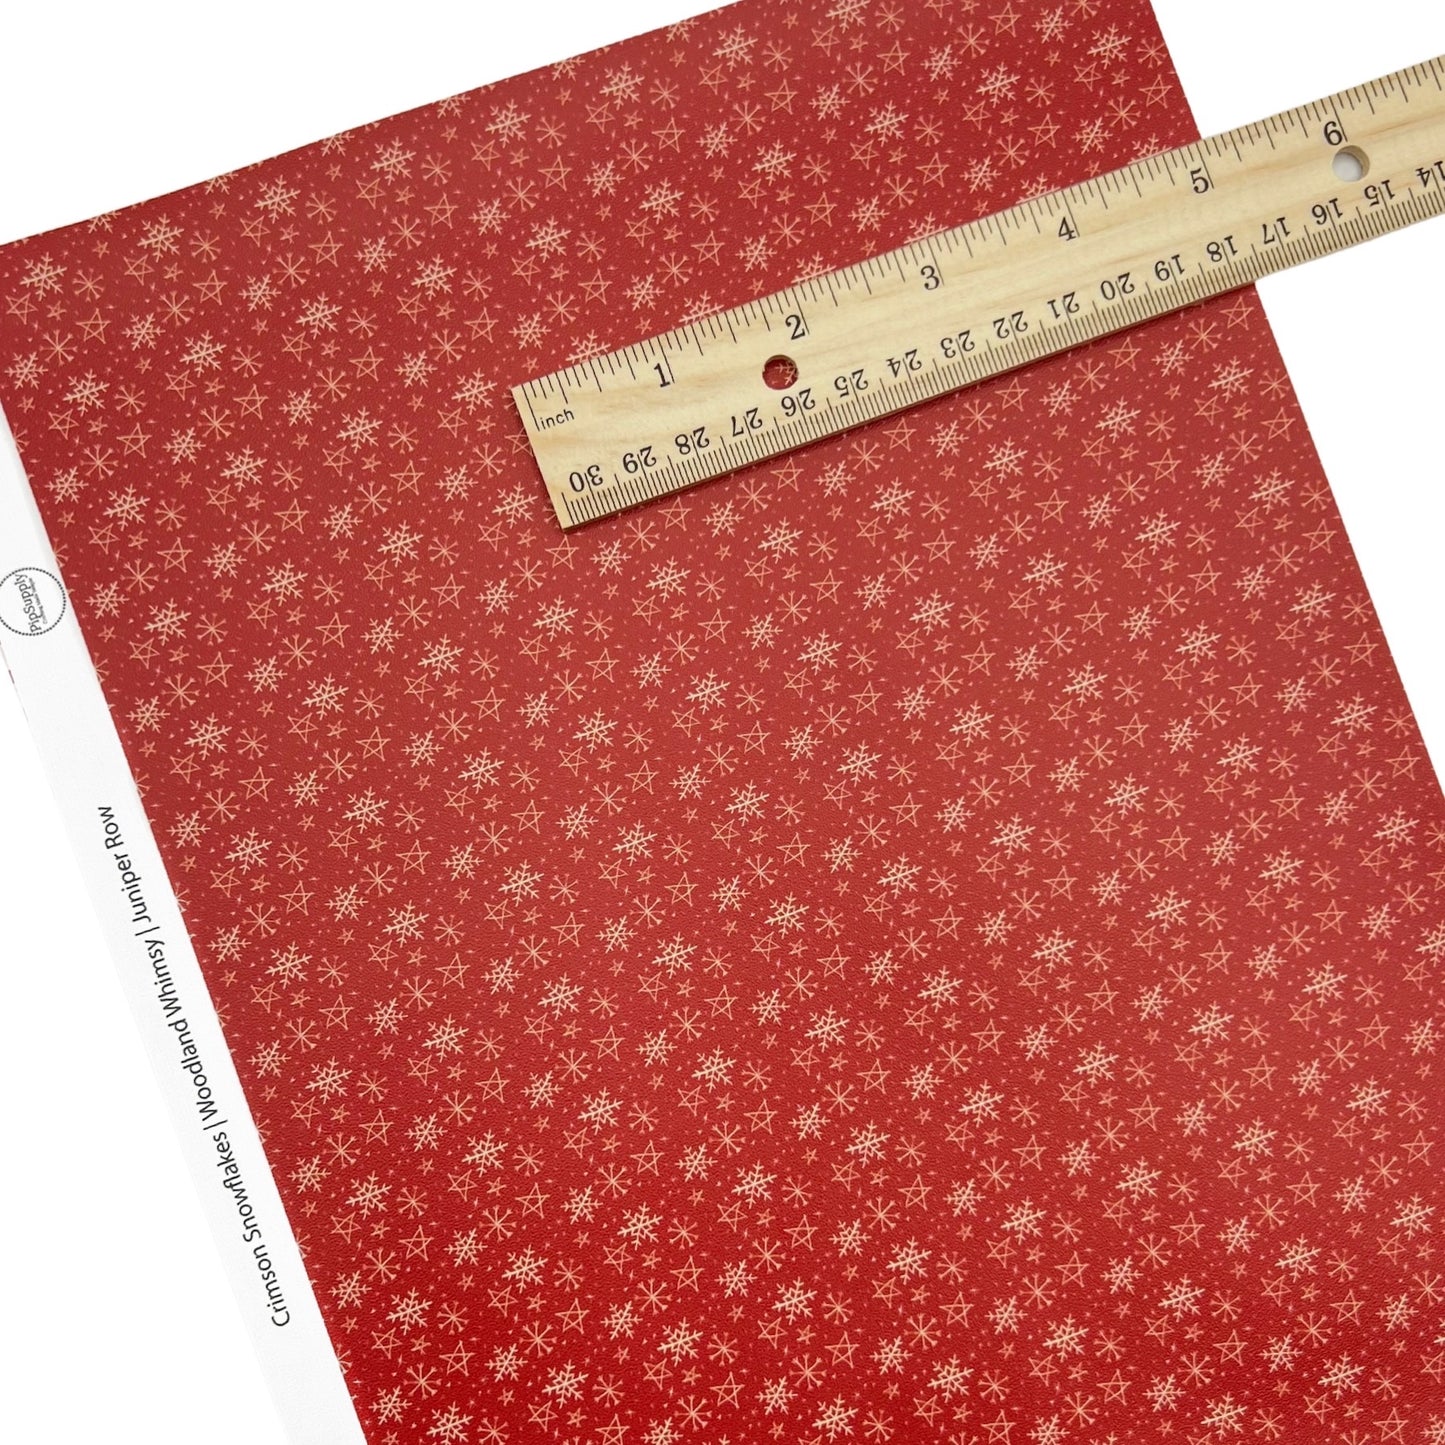 Rolled or individual christmas faux leather sheet with Snowflakes on a red background